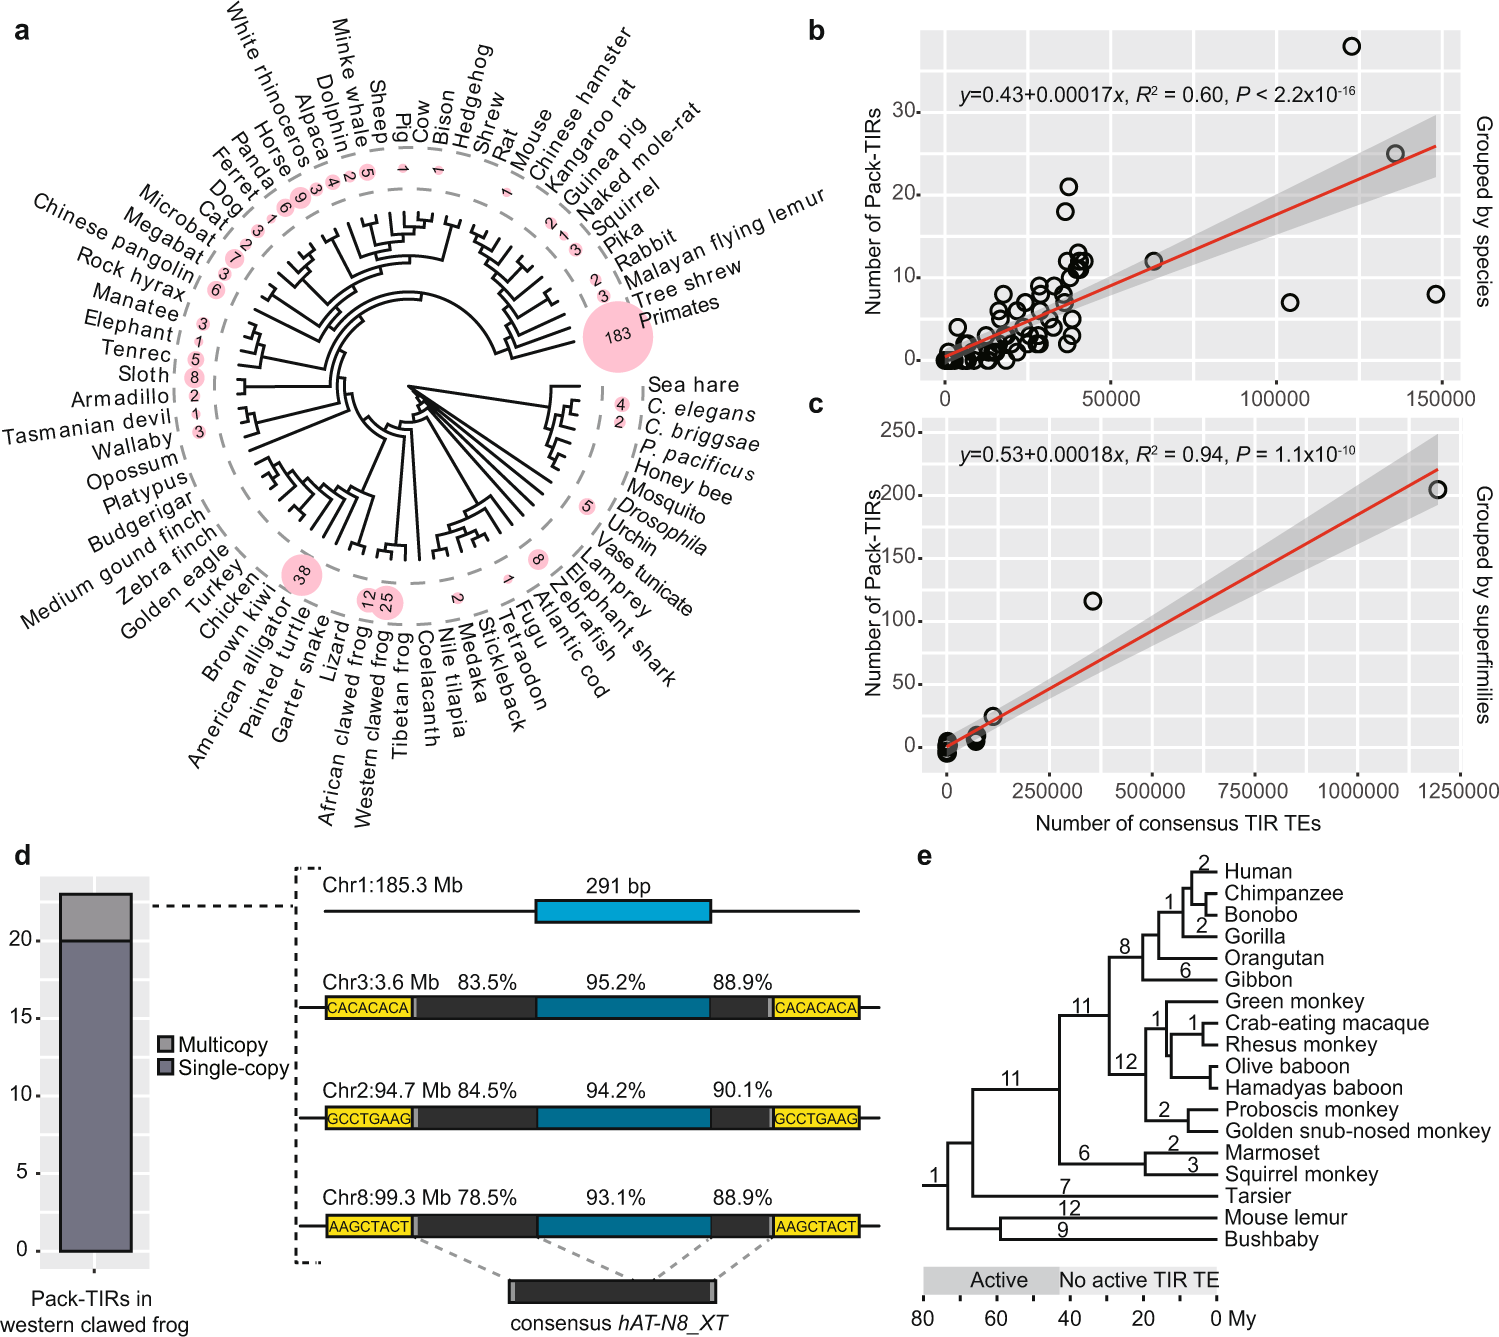 DNA transposons mediate duplications via transposition-independent and  -dependent mechanisms in metazoans | Nature Communications